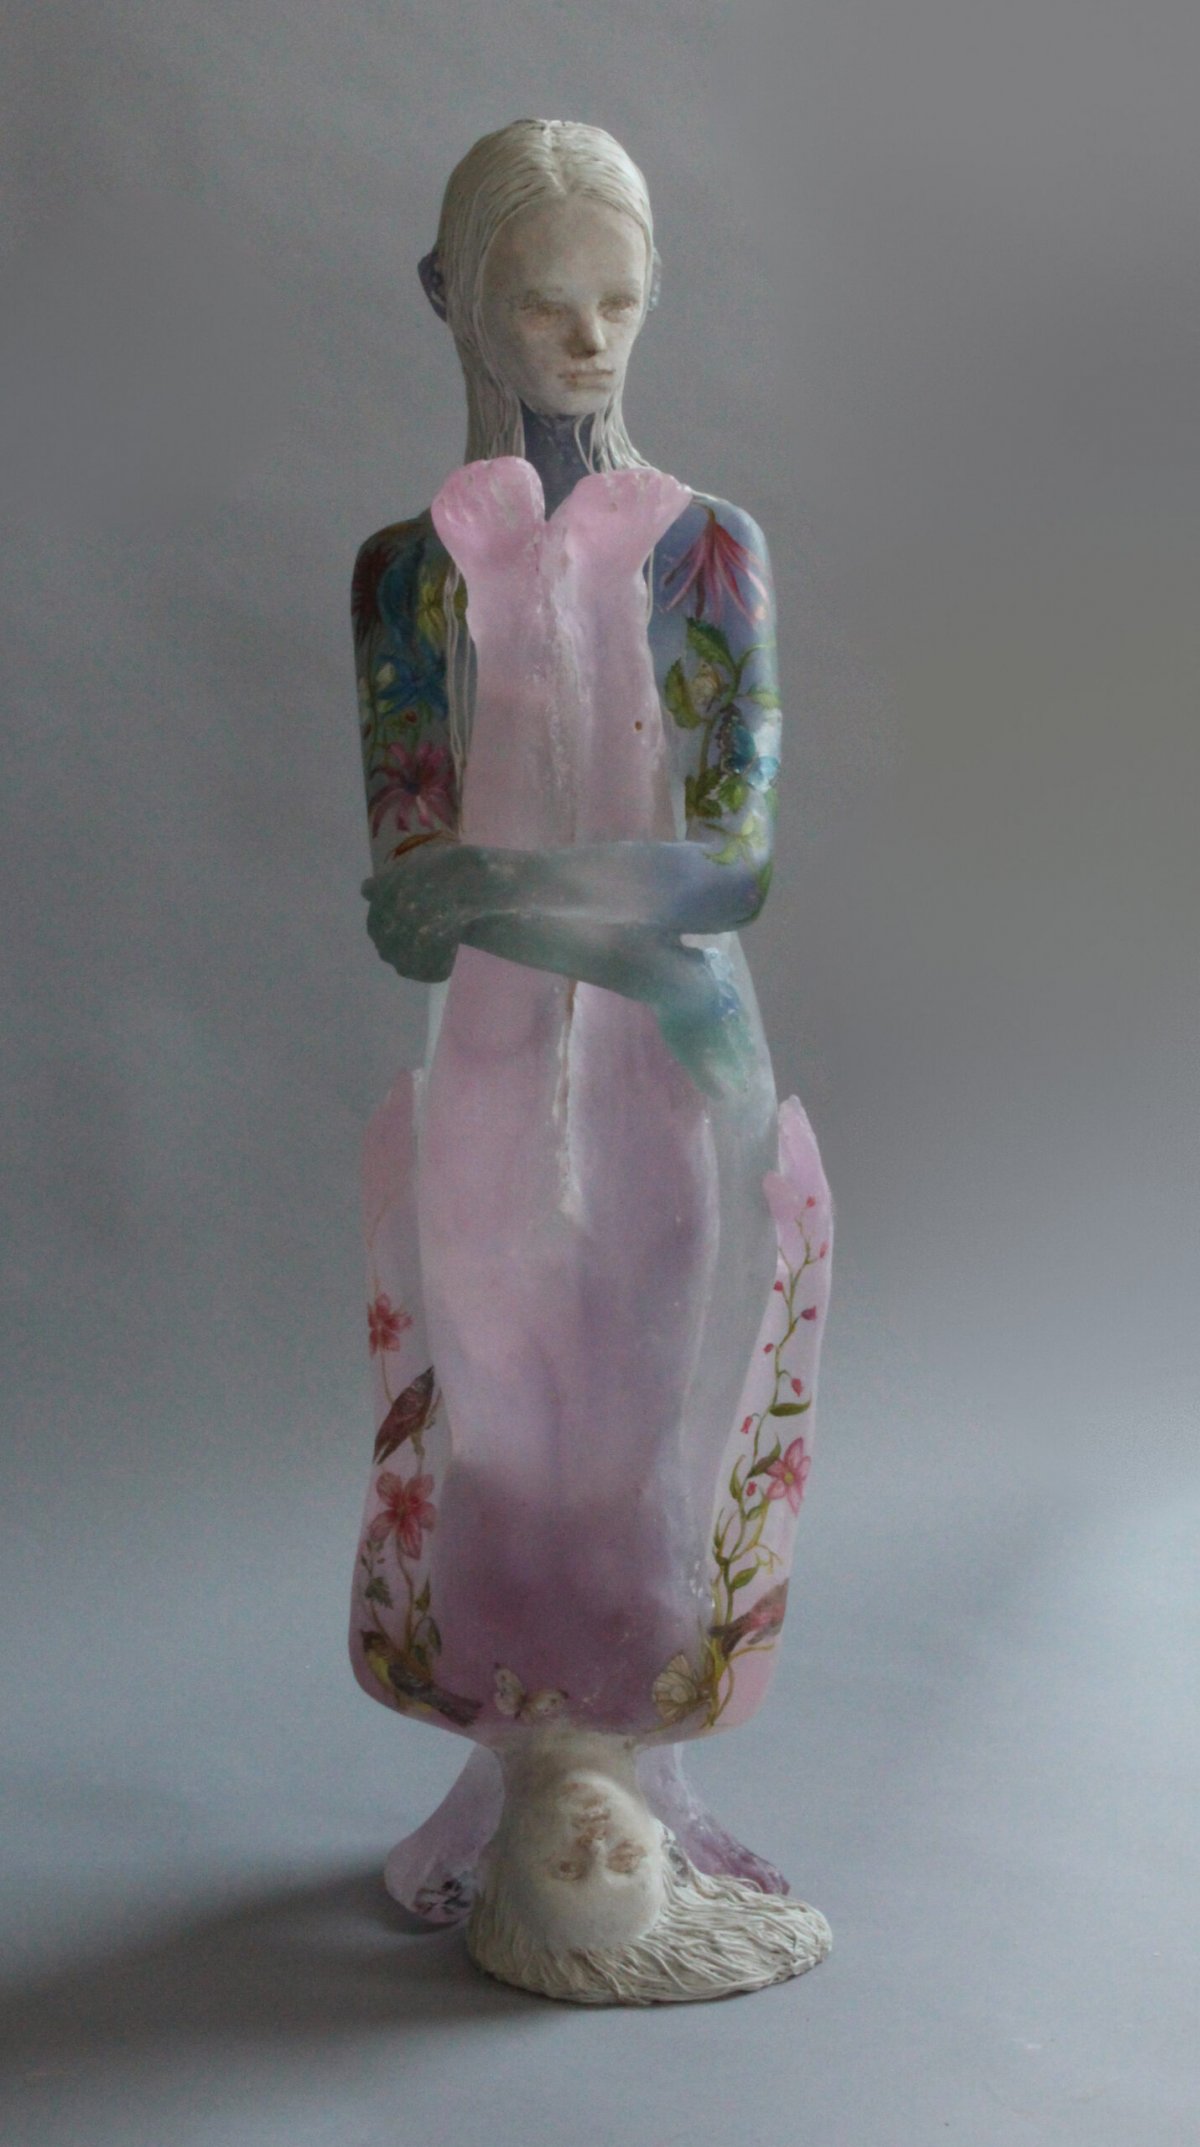 Ethereal Surrealist Sculptures Made Of Translucent Glass And Clay By Christina Bothwell 5